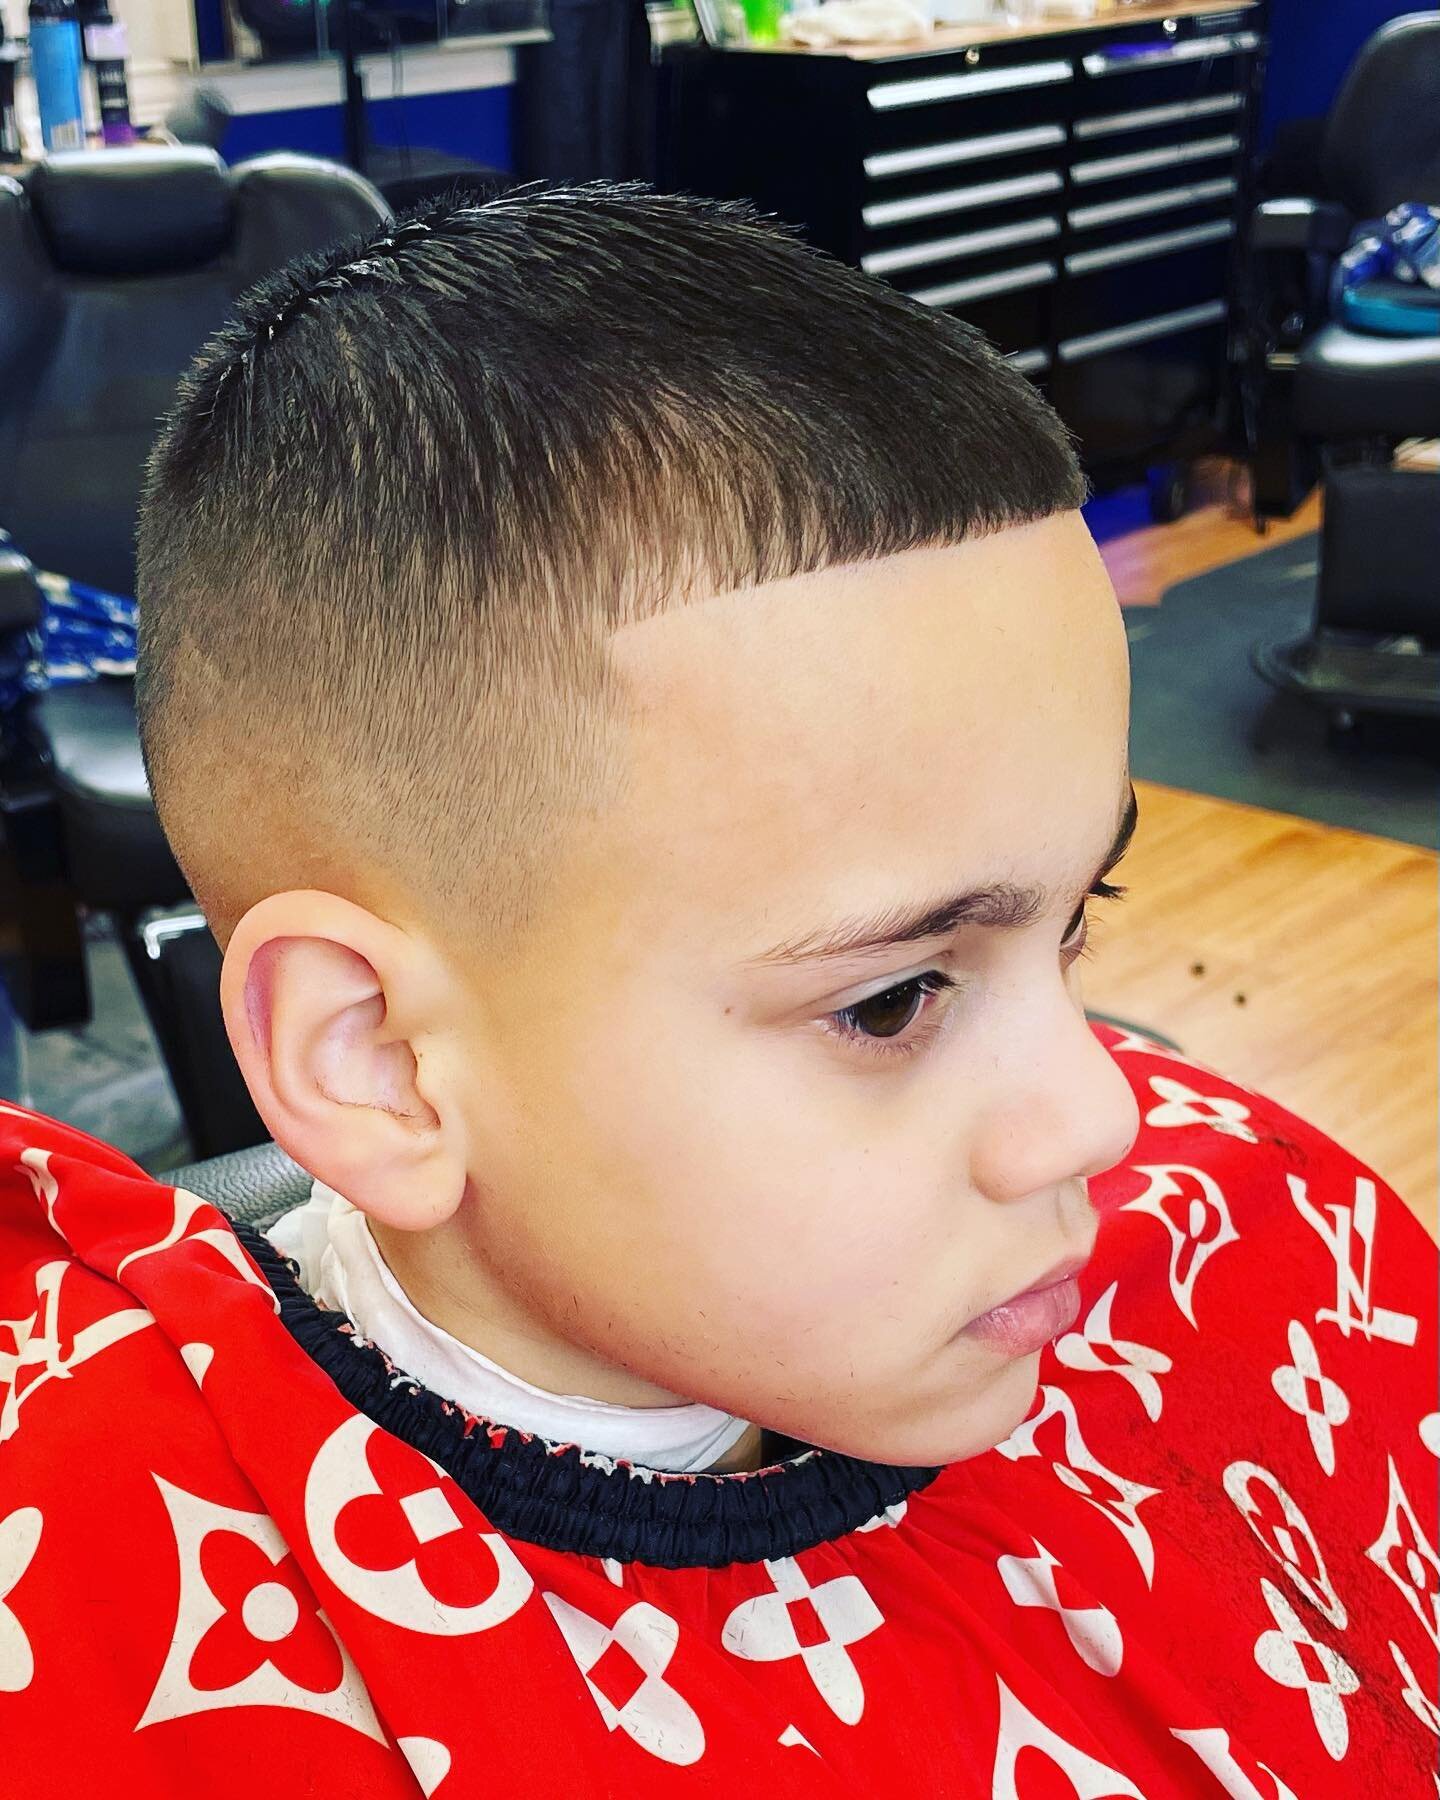 Big Transformation today. This guy left the little boy cut in the past today. Stepped it up wit the low fade! @jay_gomez_750i #lowfade #skinfade #lineup #fresh #barberlife #barbershop #barberhustle #blendz401💈 @blendz401